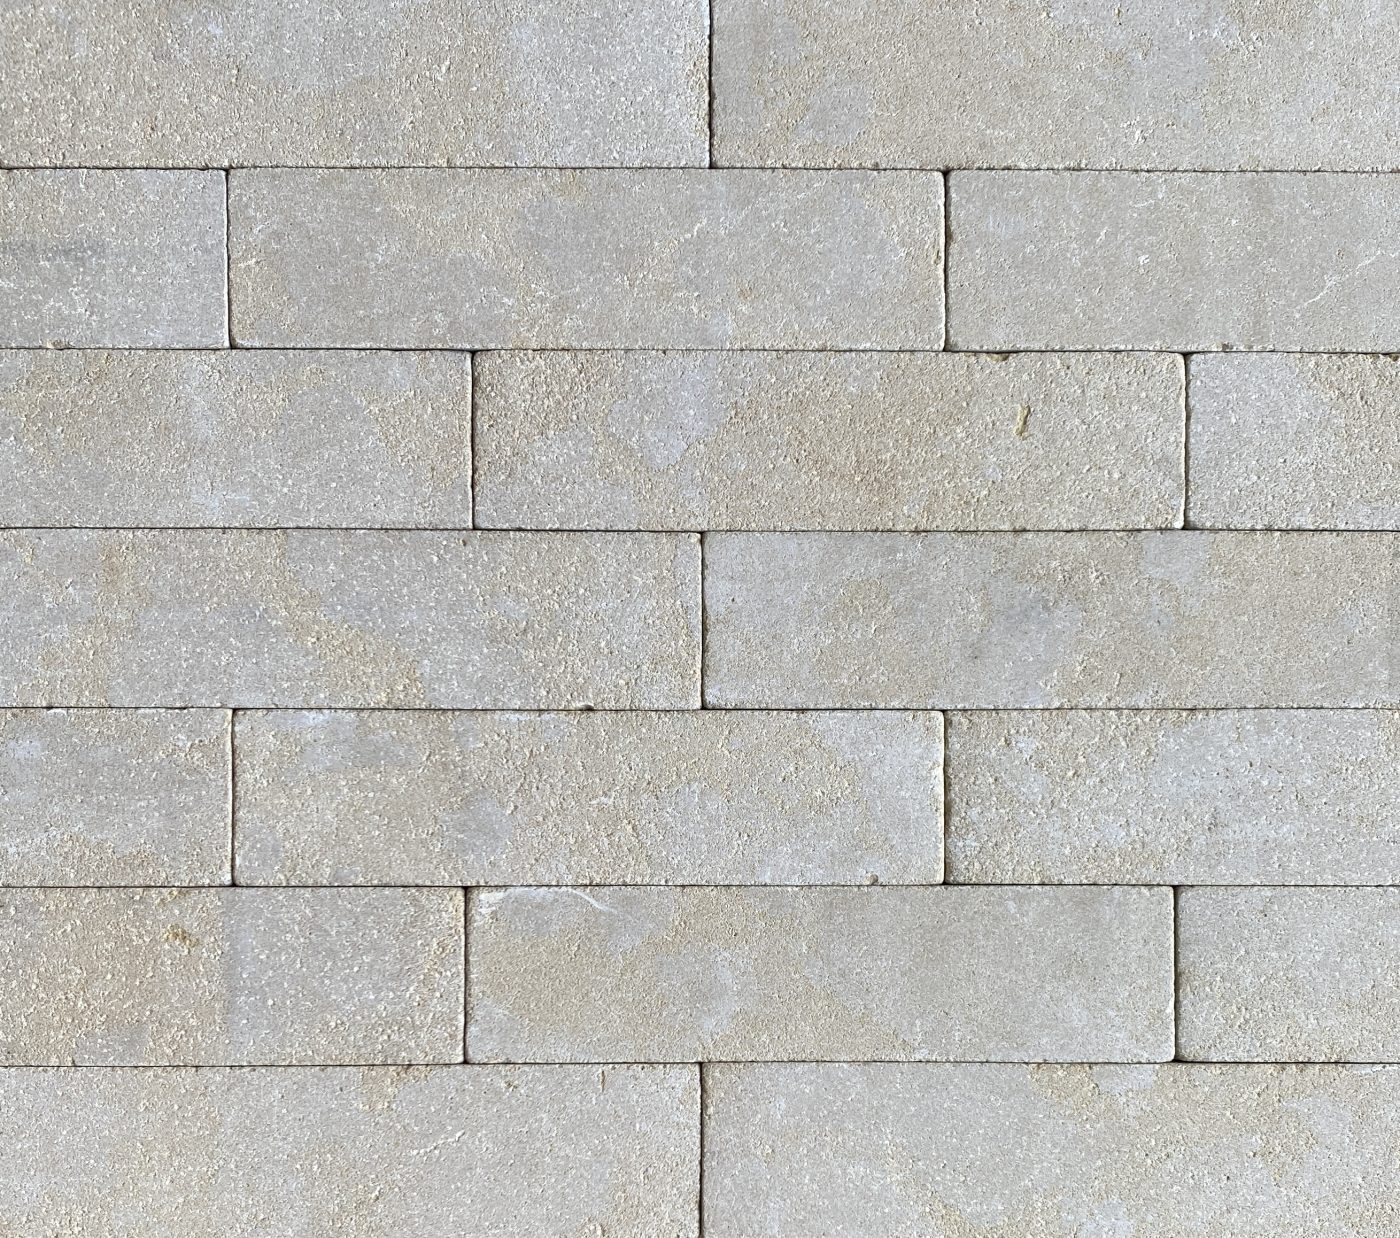 NICE-SANDBLASTED-TUMBLED-LIMESTONE-BATTONS_RMS-TRADERS_NATURAL-STONE-PAVER-SUPPLIER-MELBOURNE-5-1-scaled